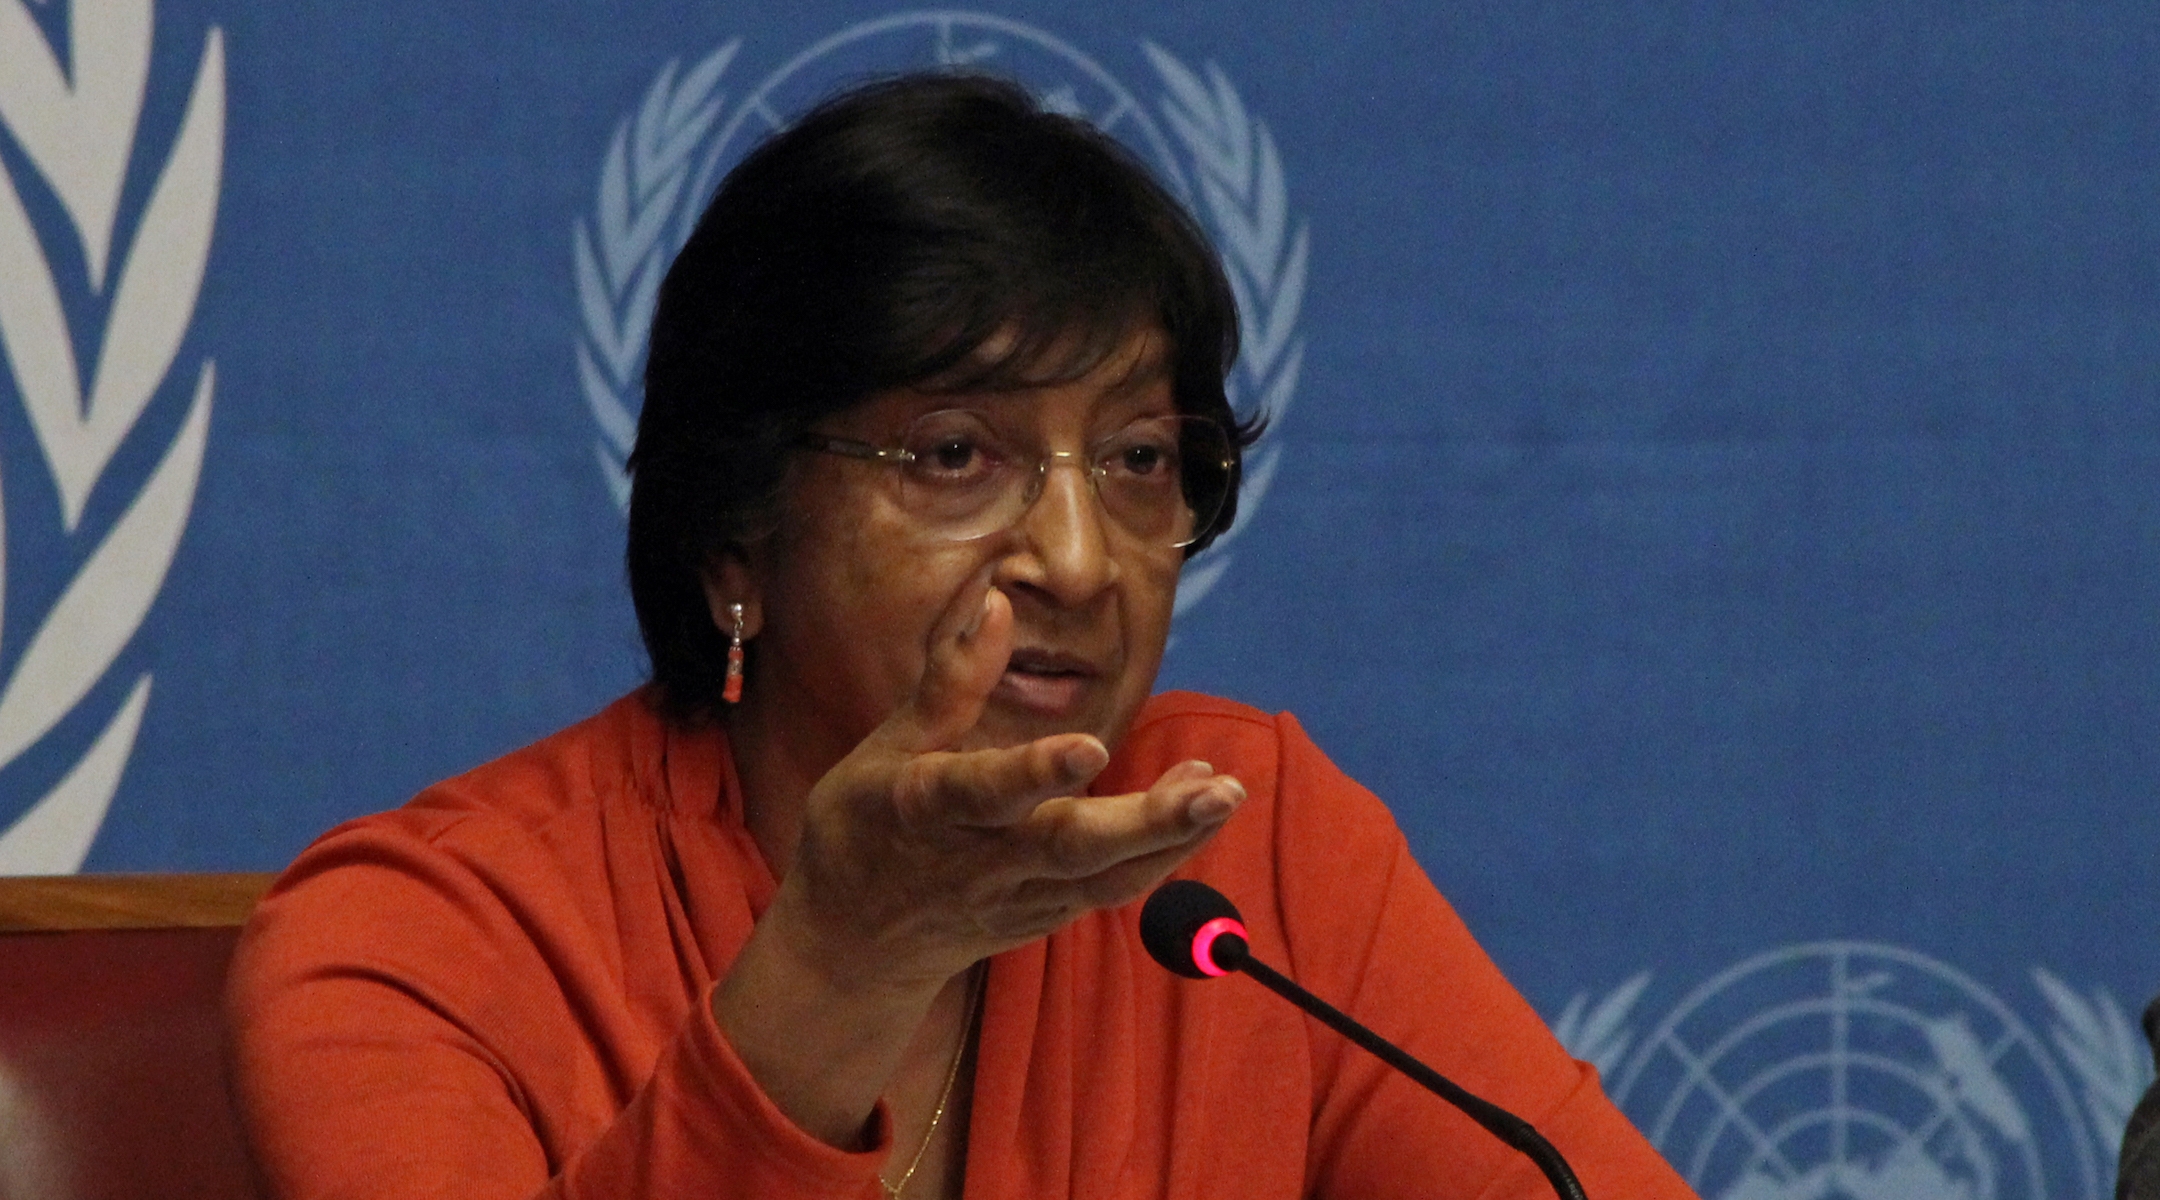 Navi Pillay, pictured in July 2014. (Fatih Erel/Anadolu Agency/Getty Images)